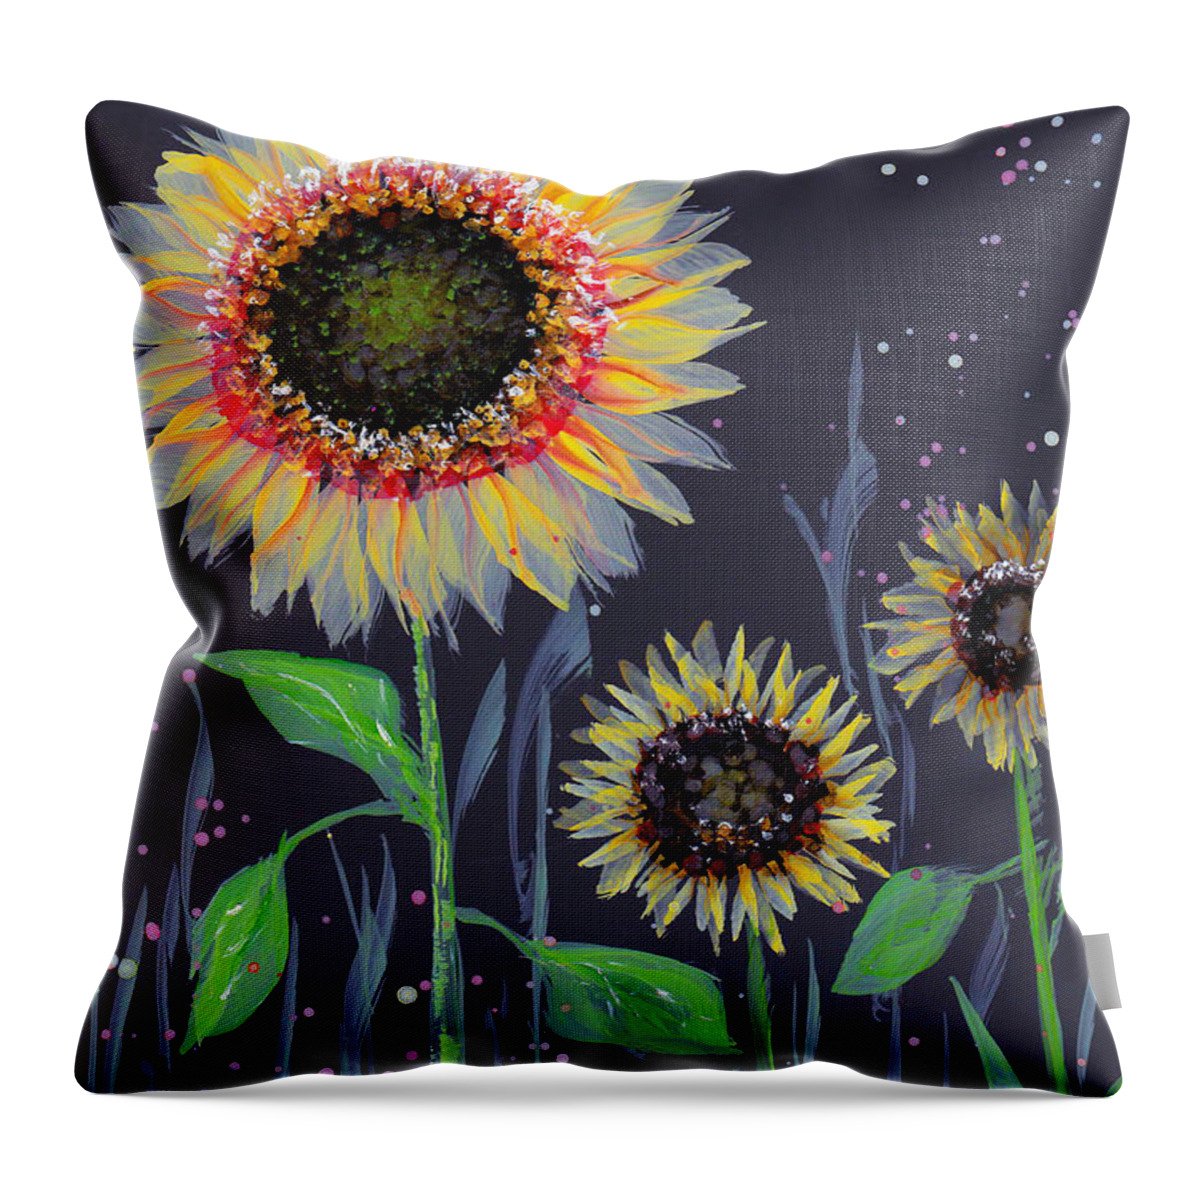 Sunflower Throw Pillow featuring the painting Brushed Sunflower No.2 by Kimberly Deene Langlois